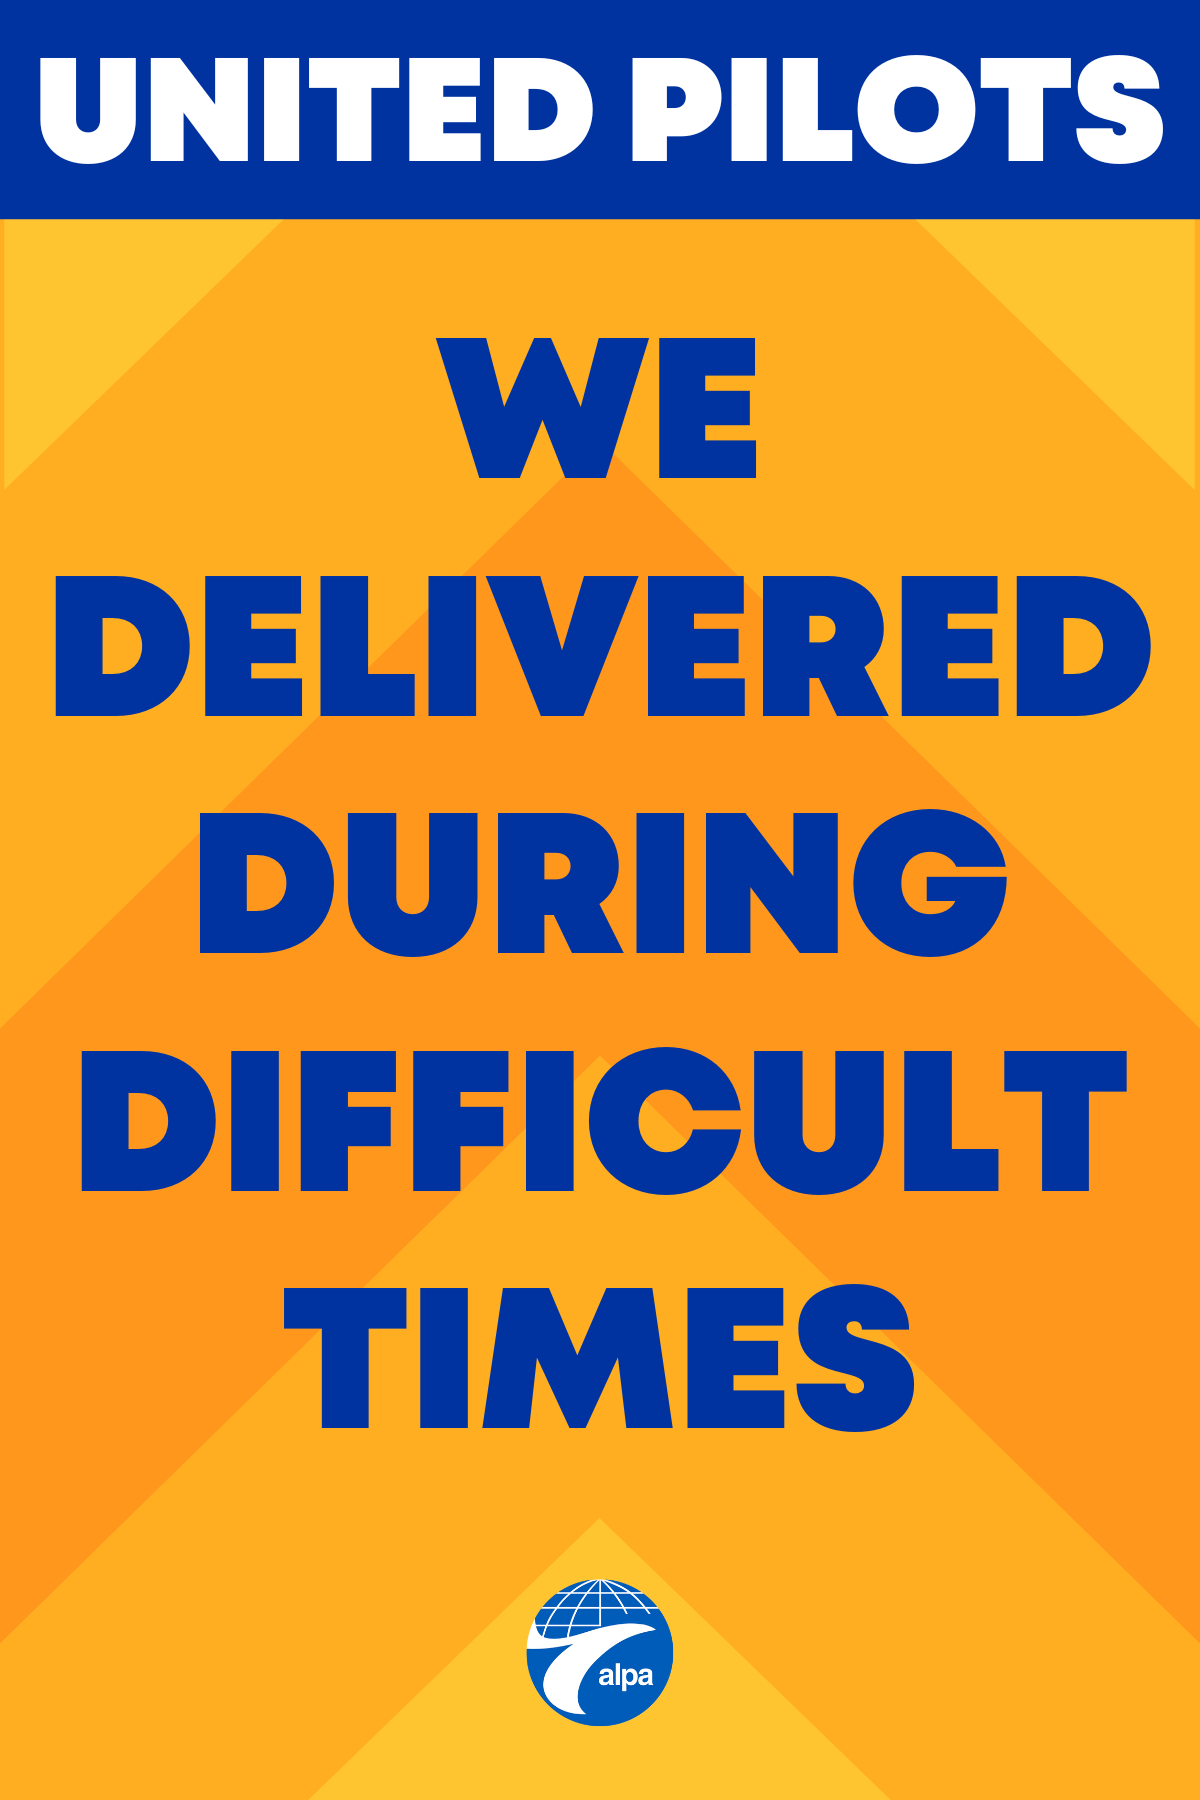 We Delivered During Difficult Times picket sign image